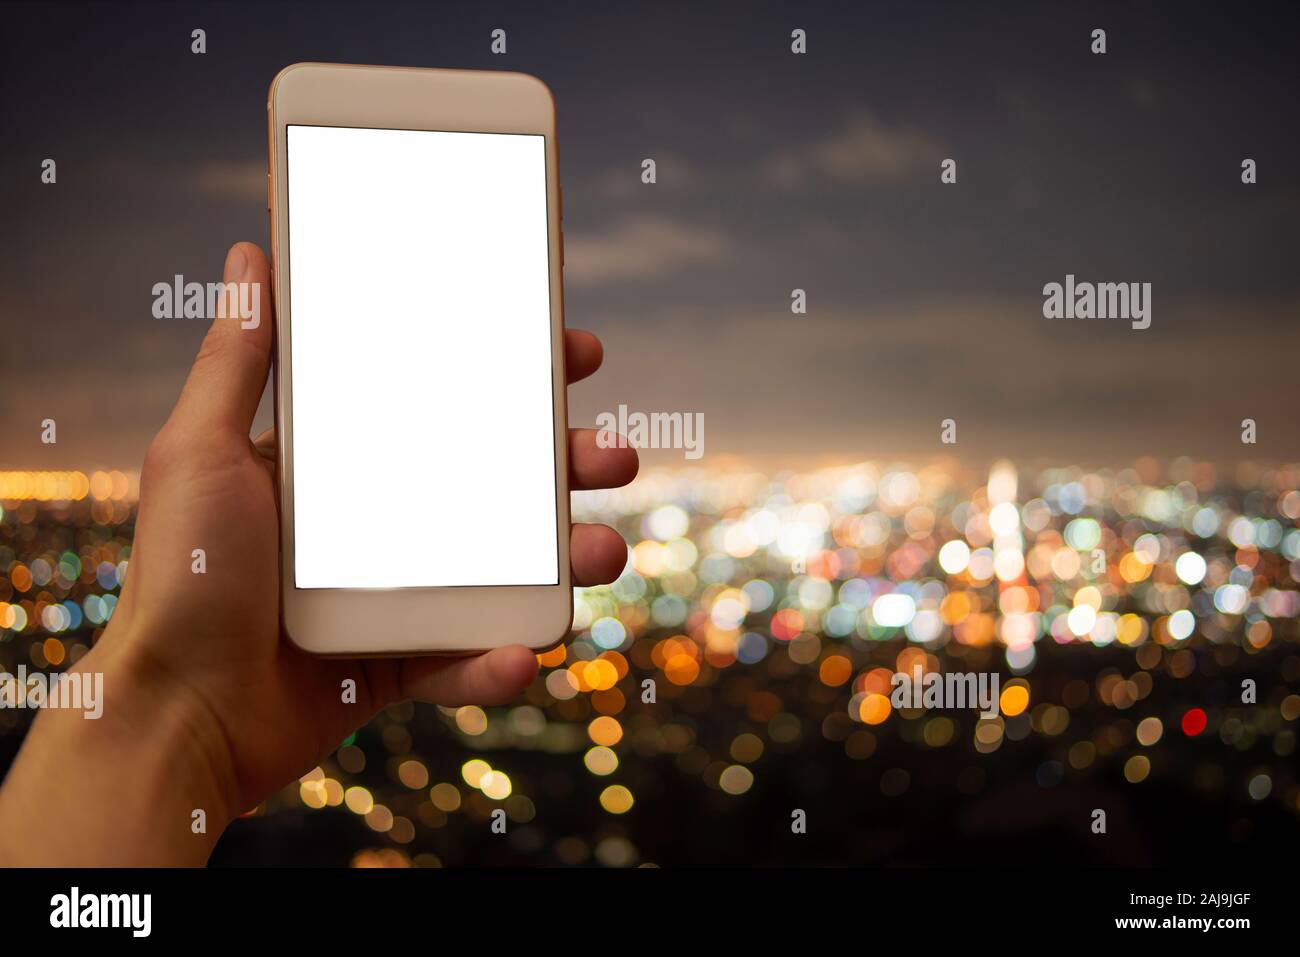 Hand holding a mobile phone with blank display, unsharp city lights in the background Stock Photo